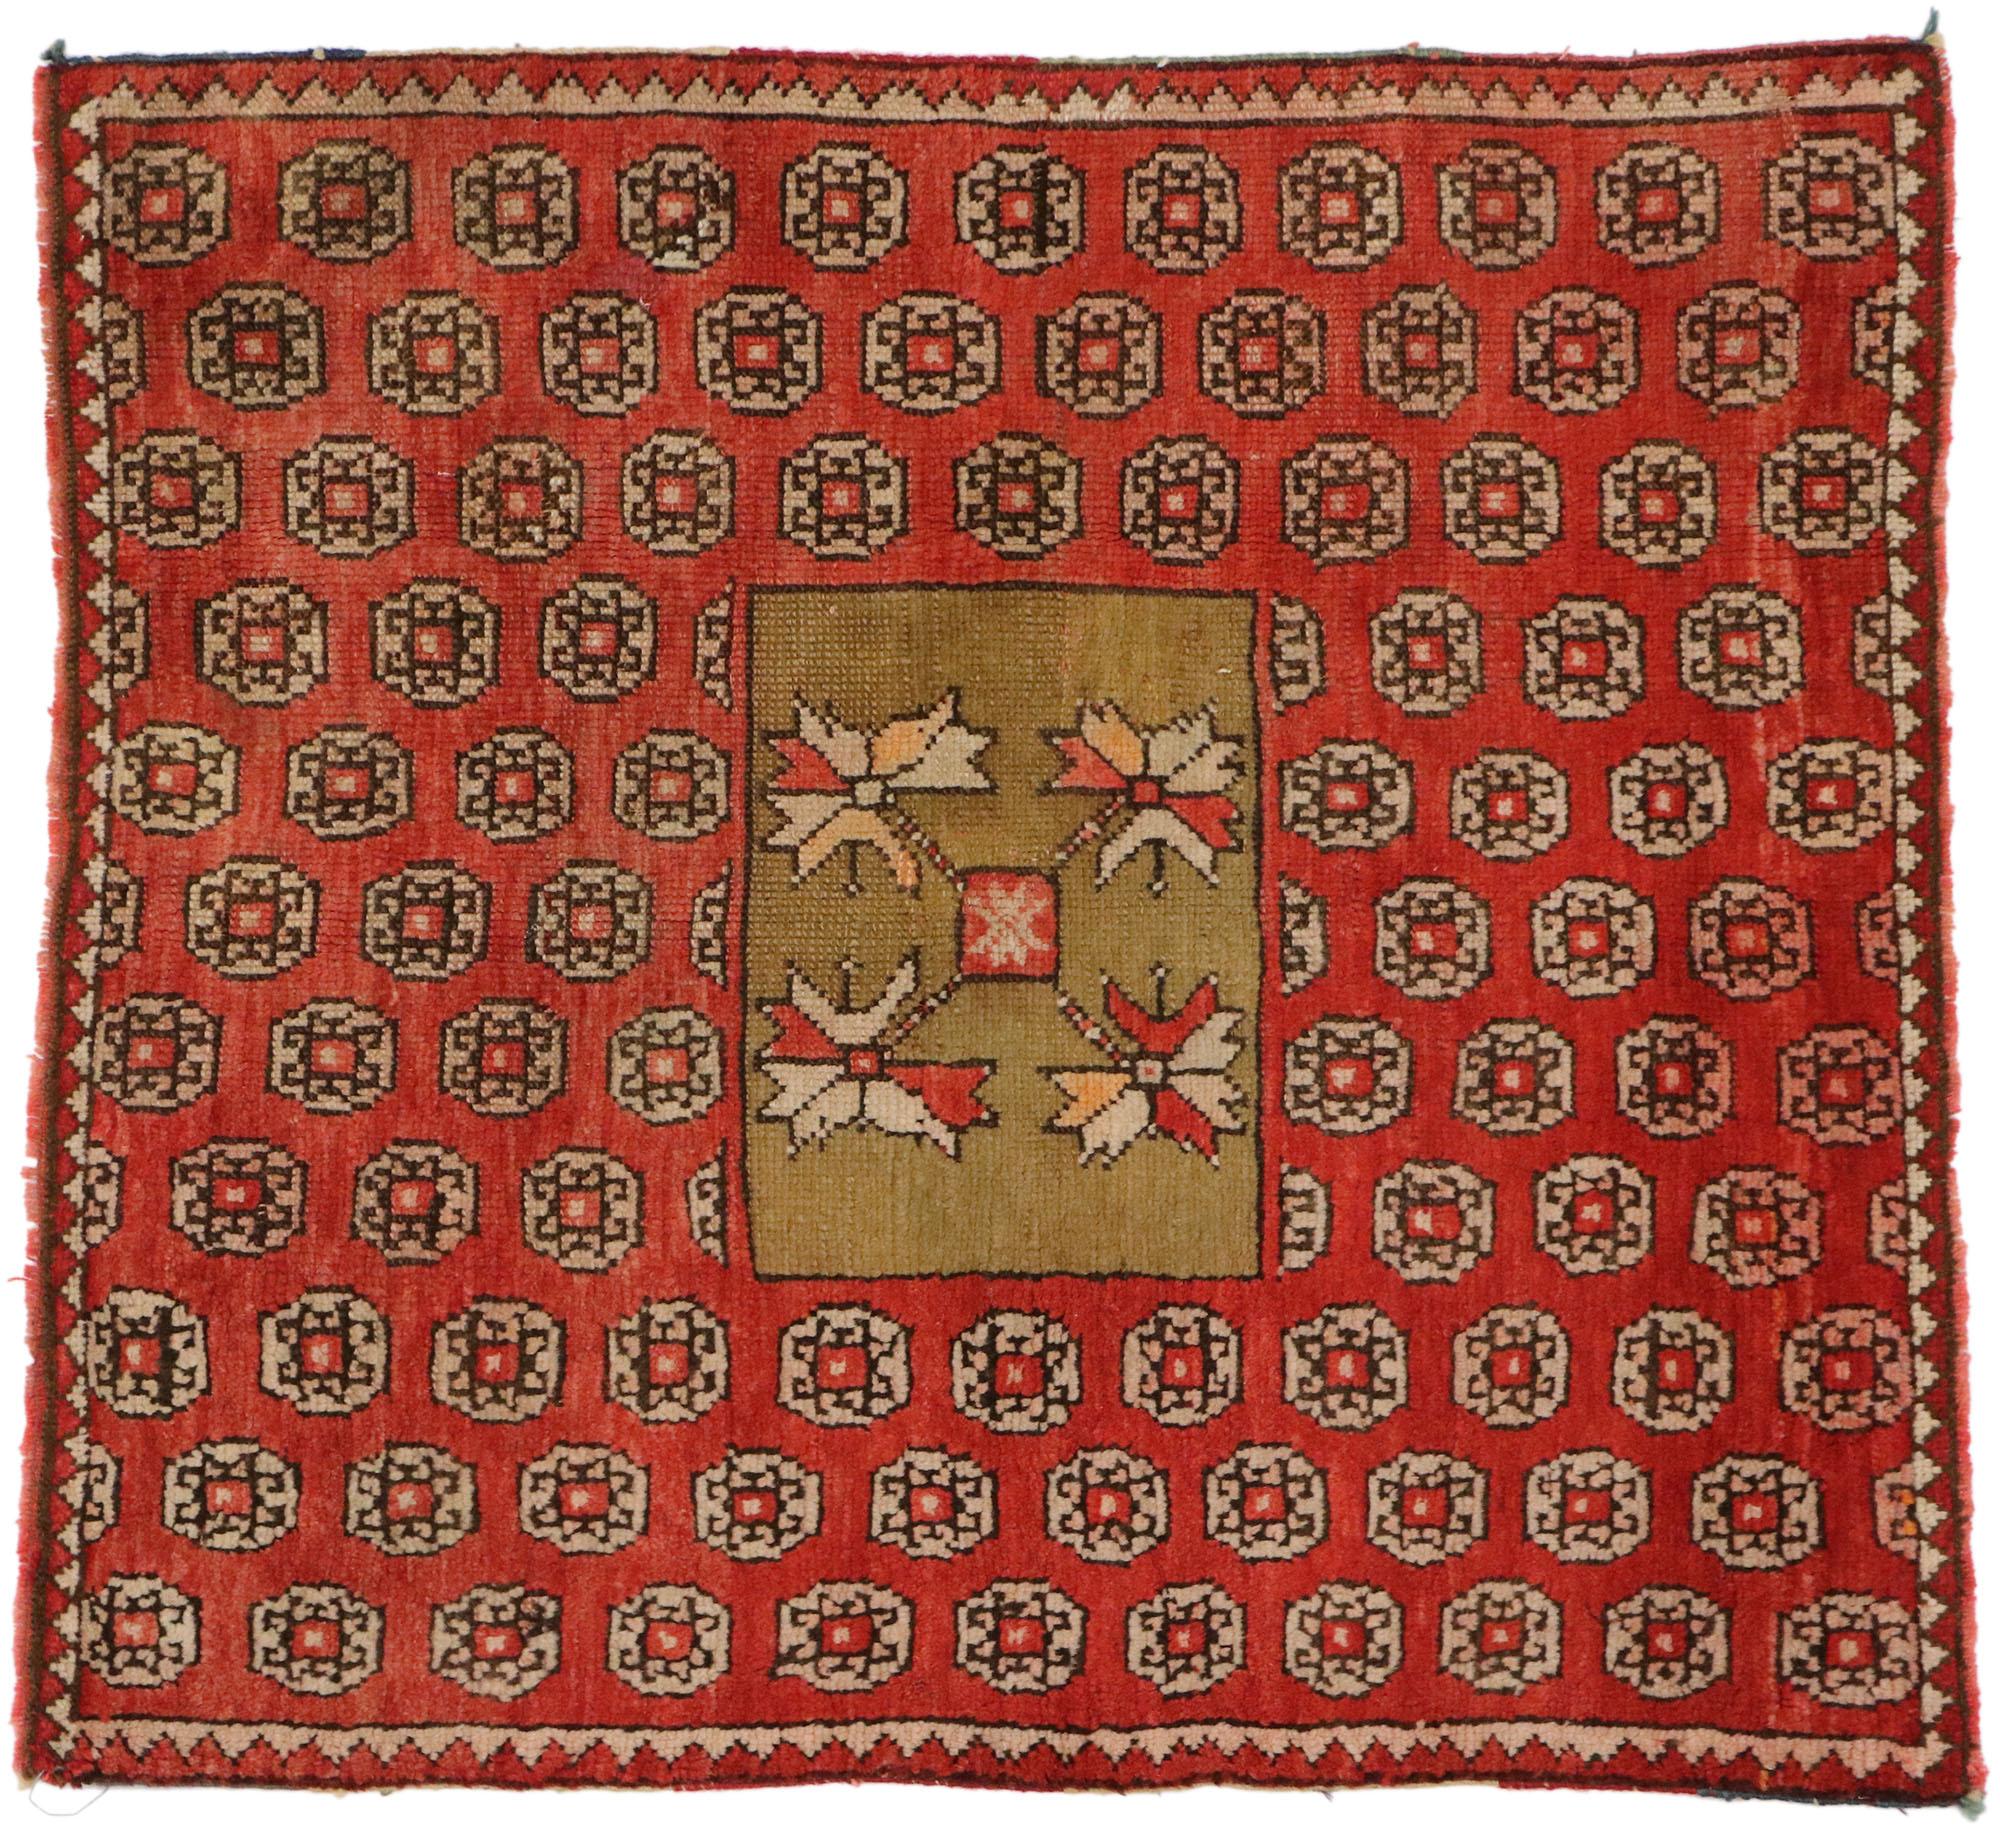 51170 Antique Russian Karabagh Square Rug with Traditional Modern Style. This hand-knotted wool antique Russian Karabagh rug features a striking all-over geometric pattern enclosing a square medallion. Rendered in contrasting colors of red and camel